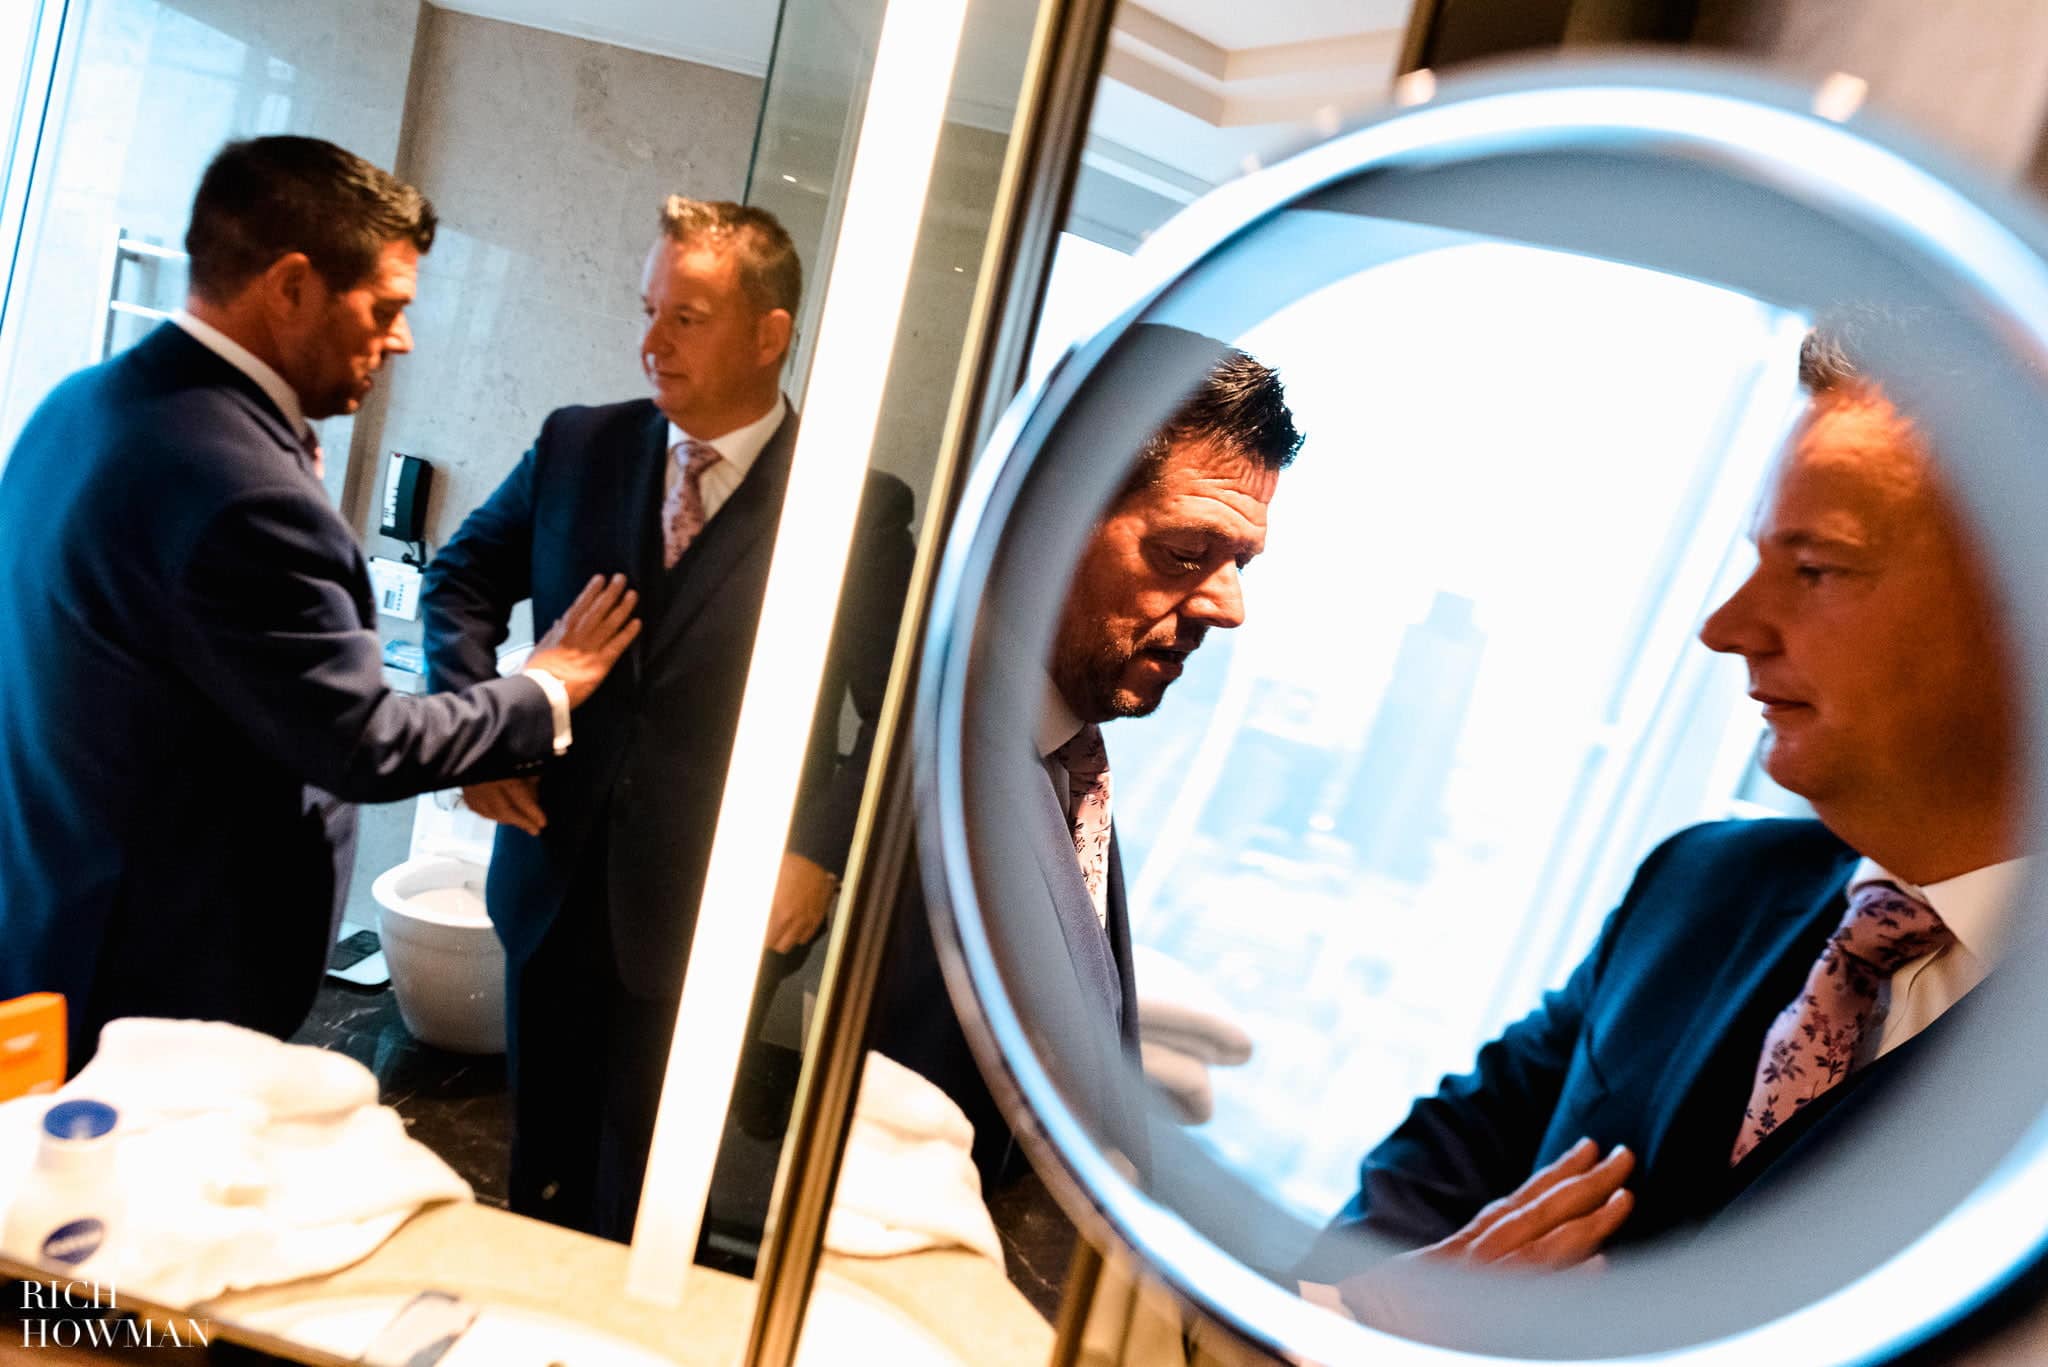 Reflections of the grooms getting ready at the Shangra-la hotel at the Shard in London before their wedding